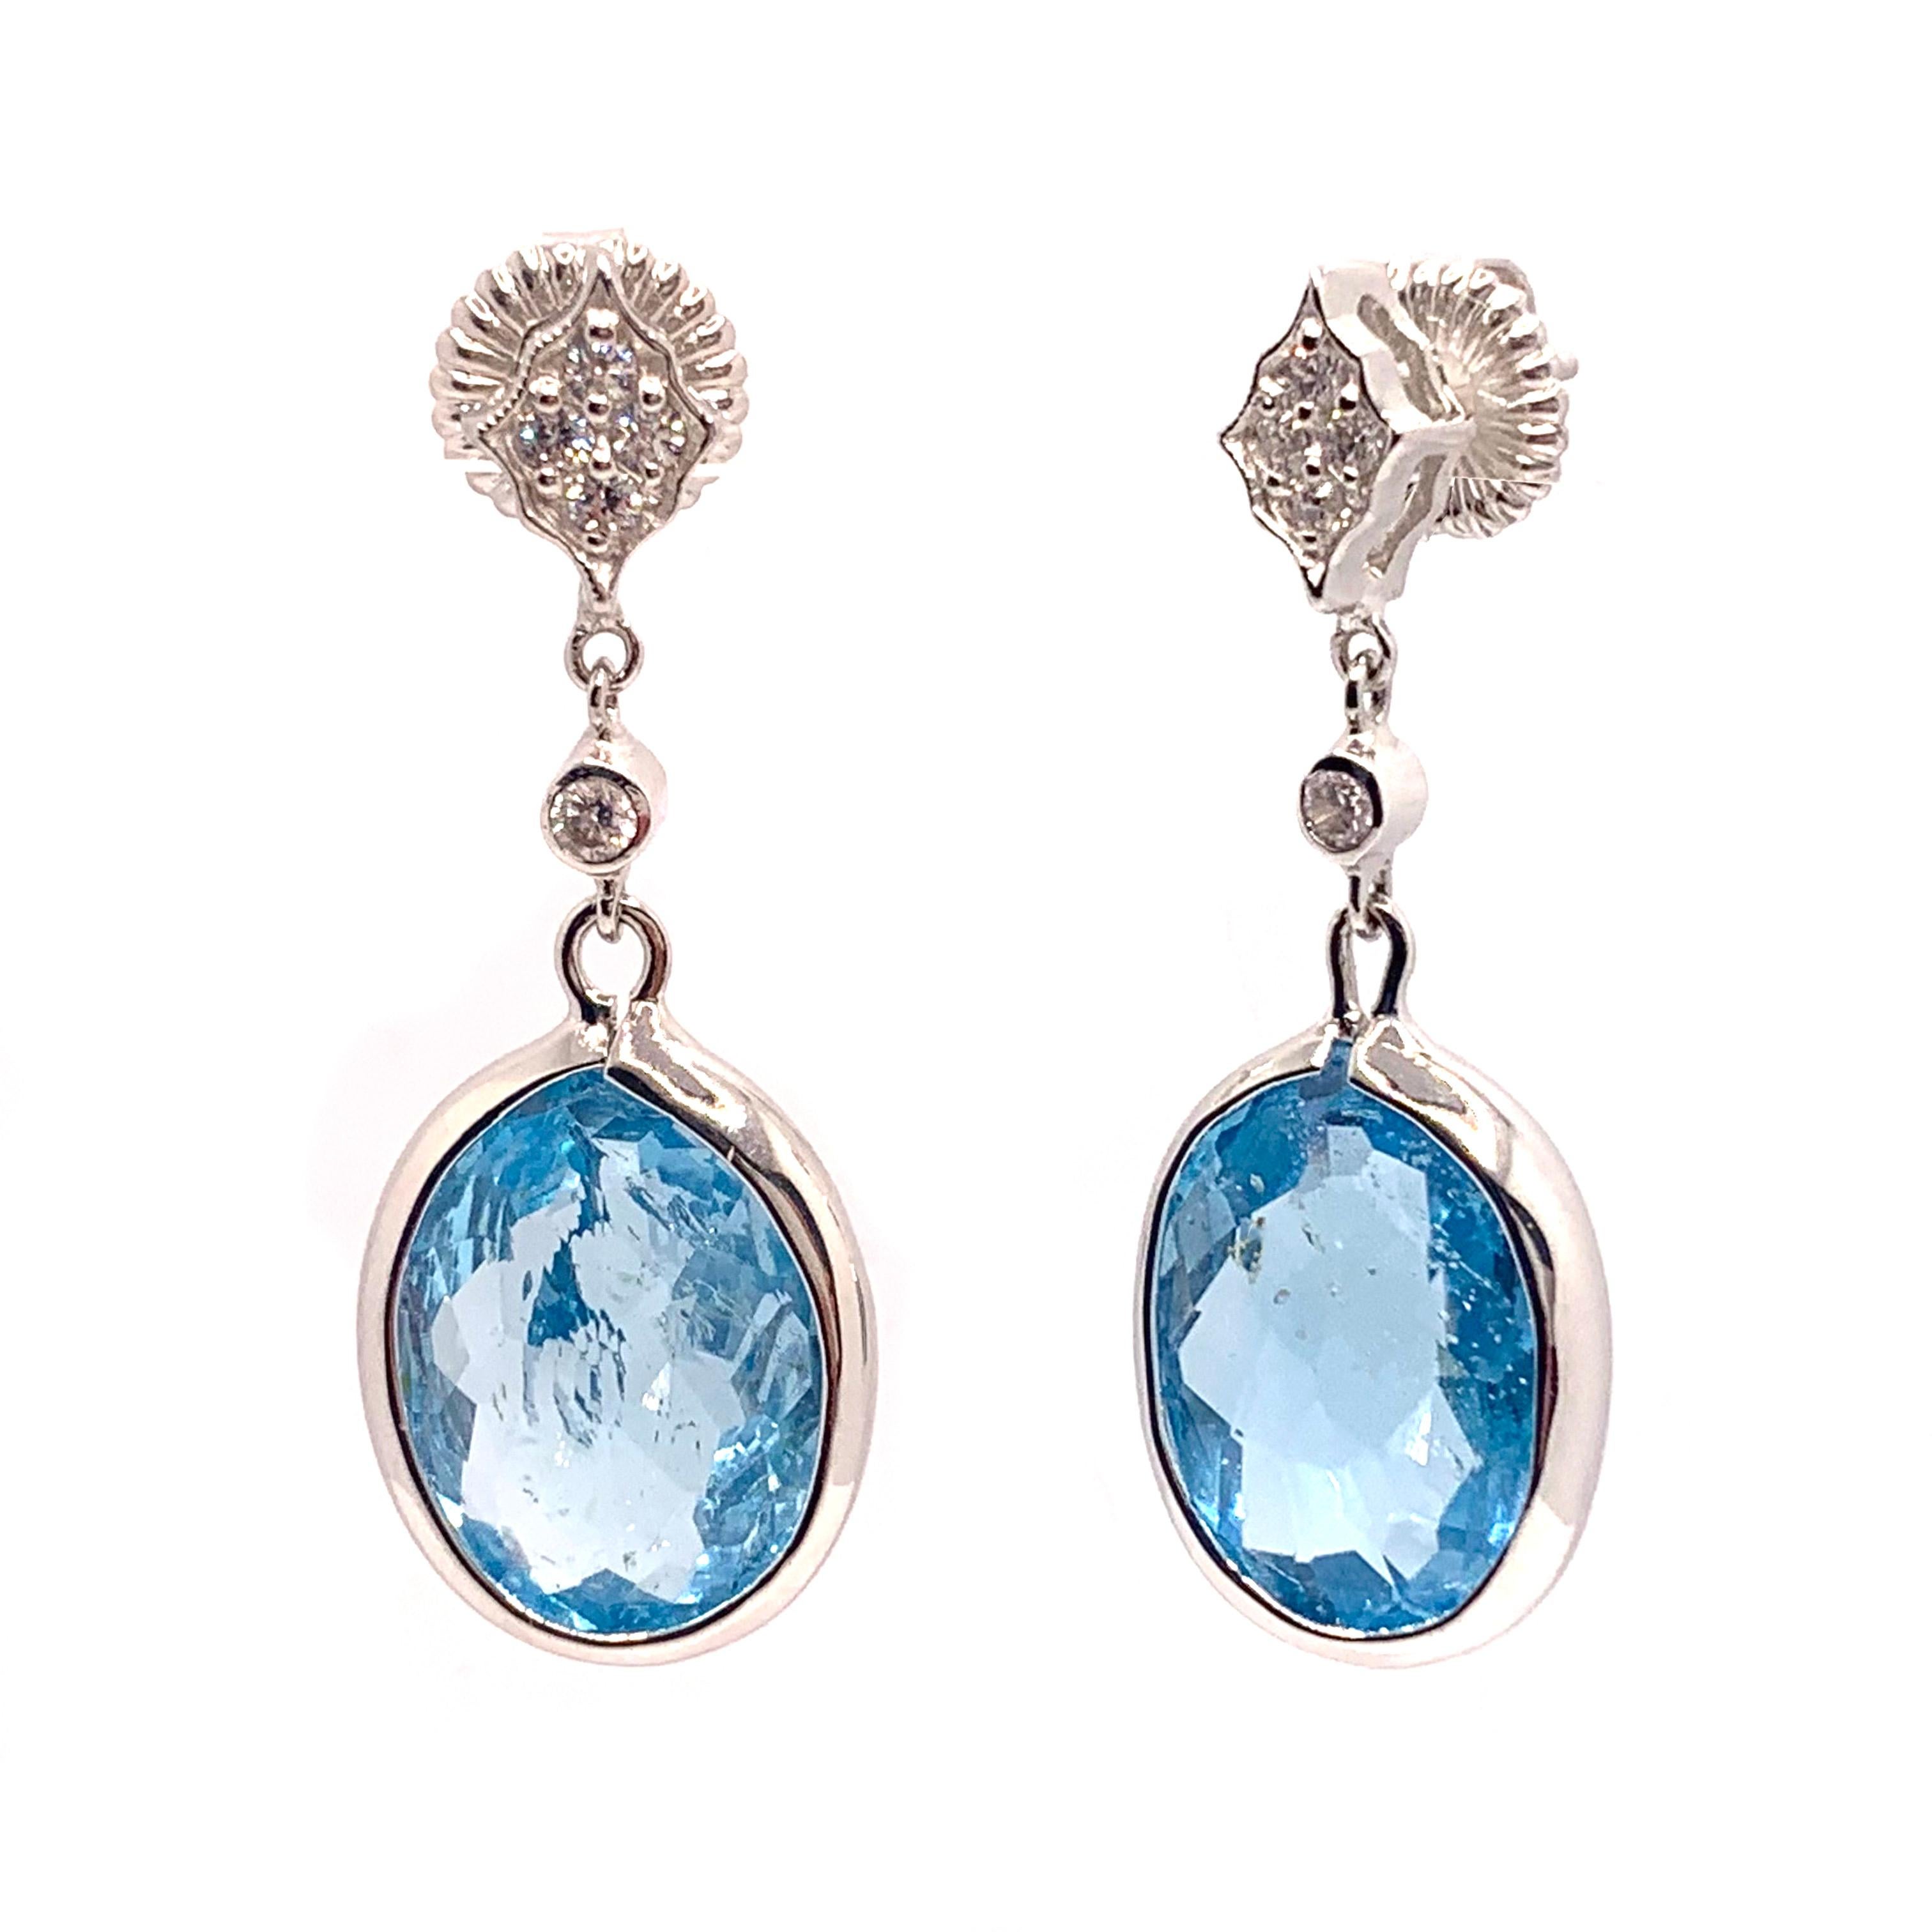 The stunning earrings feature a pair of large 37 carat multi-facet genuine blue topaz, adorned with round white zircon (genuine stones), hand bezel-set in platinum rhodium plated over sterling silver. Straight post with large friction earring back